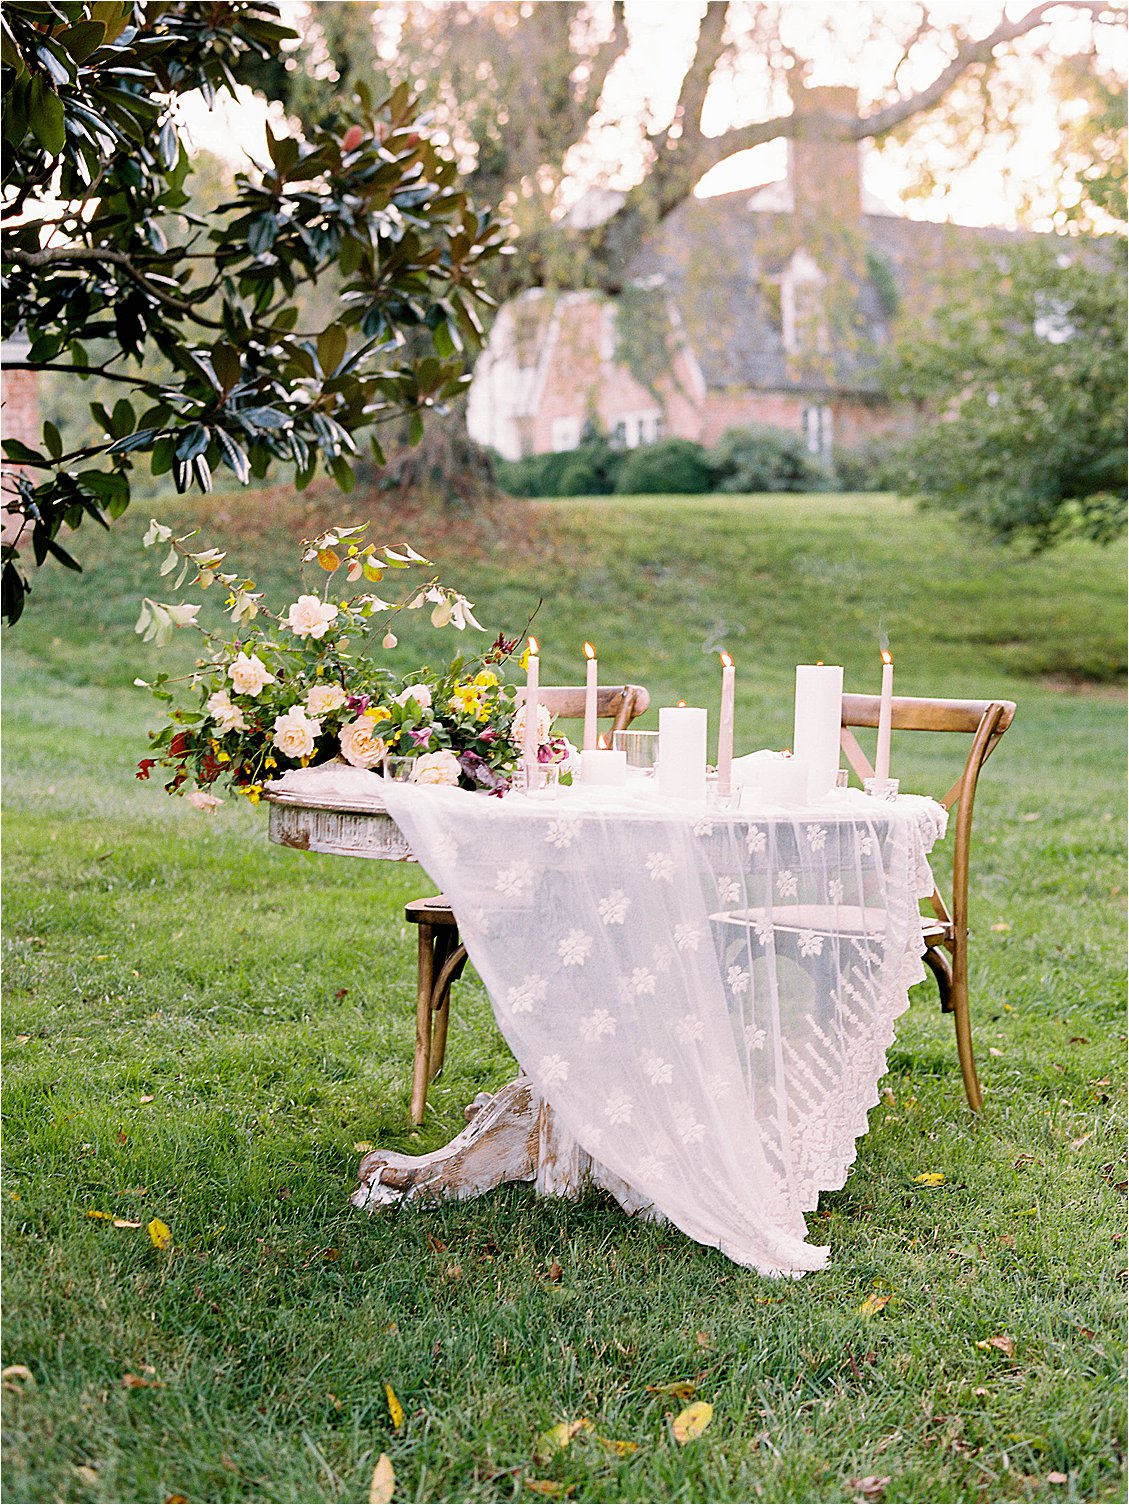 Wedding reception under a magnolia tree in Maryland Vow Renewal on film with Renee Hollingshead